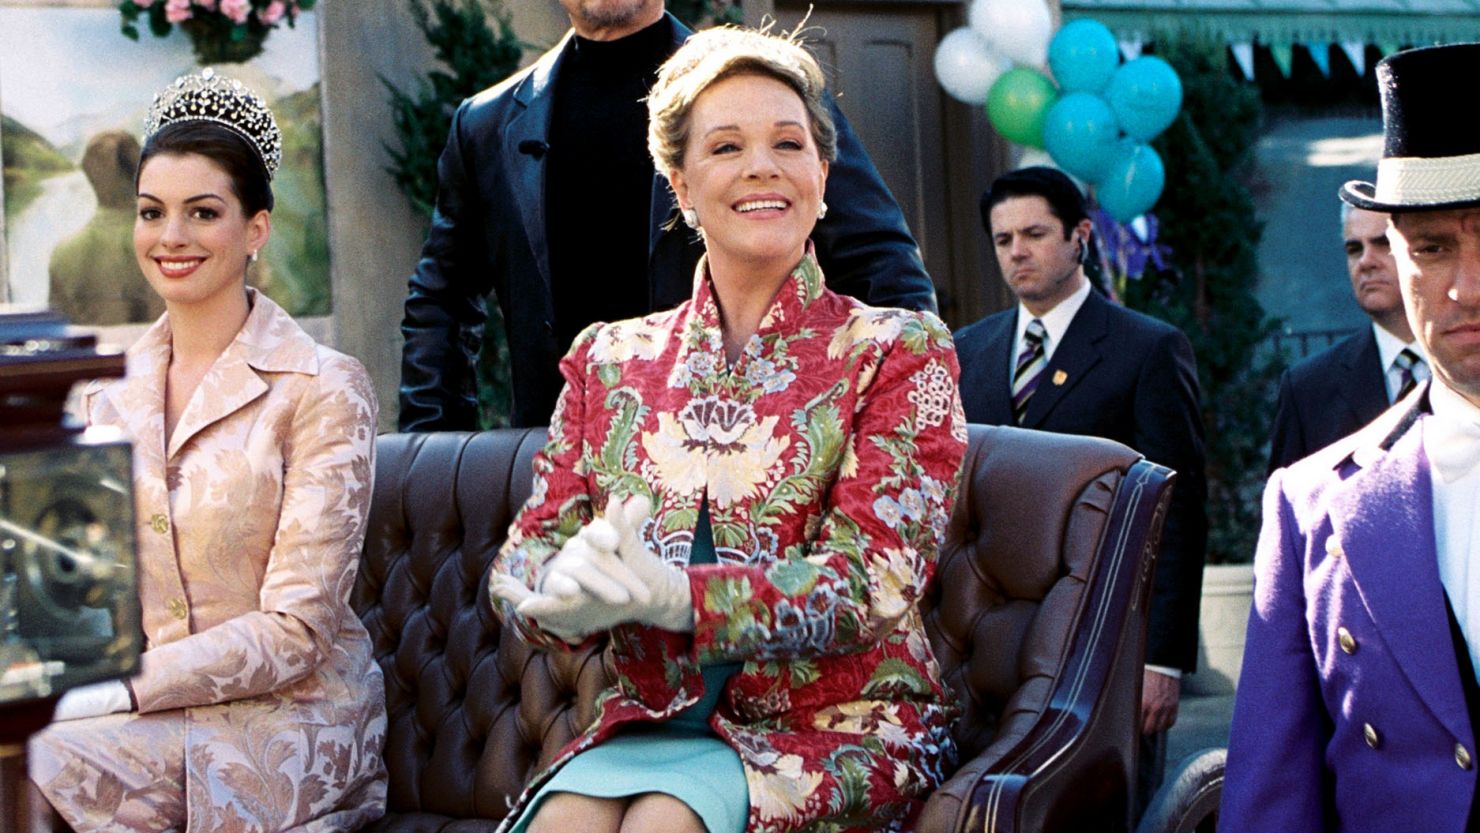 Anne Hathaway, Julie Andrews and Hector Elizondo in a scene from "The Princess Diaries 2: Royal Engagement." 